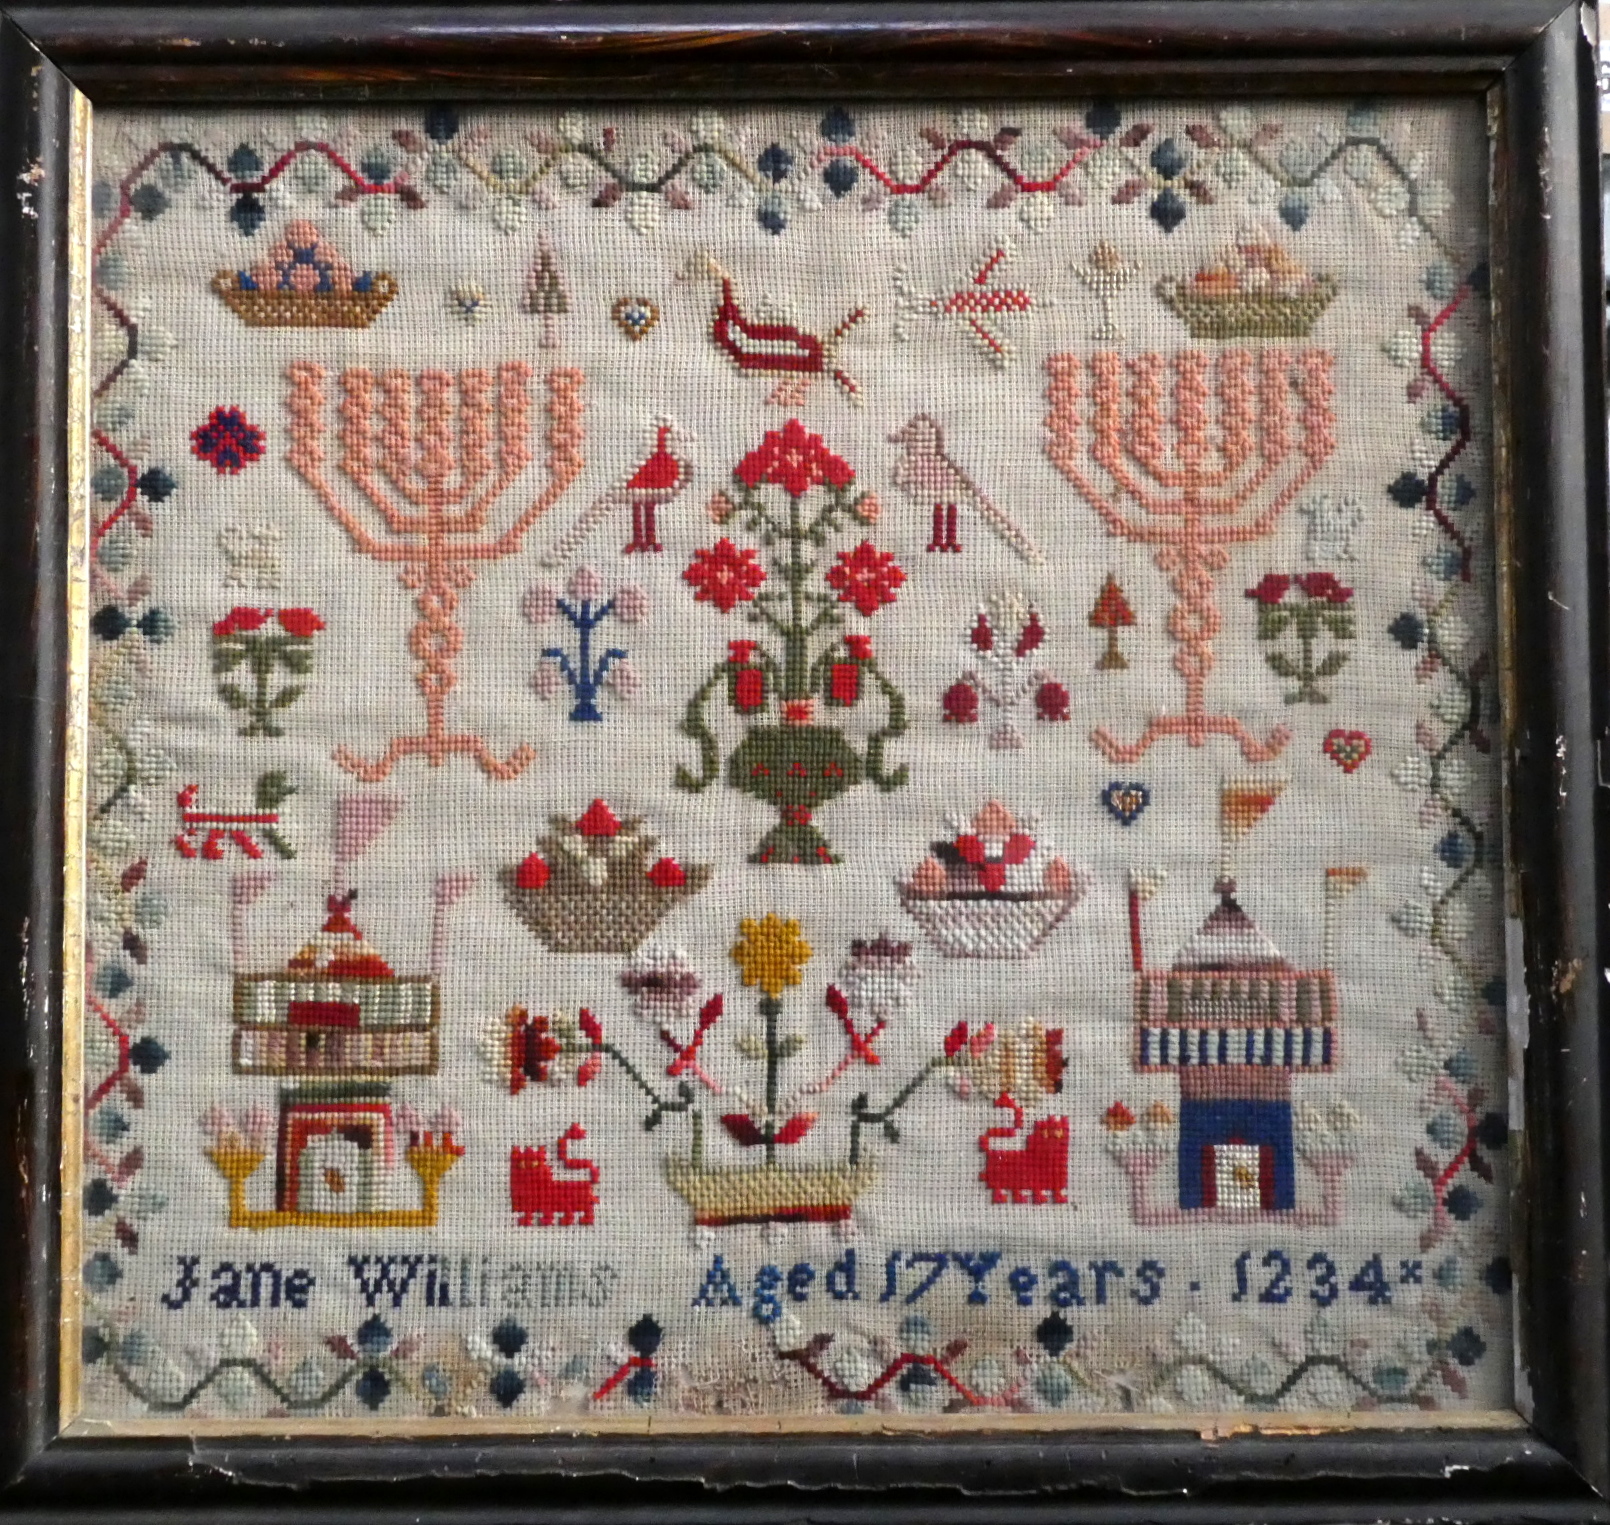 A William IV needlework sampler - showing flowers and birds, Jane Williams Aged 17 Years 1834,